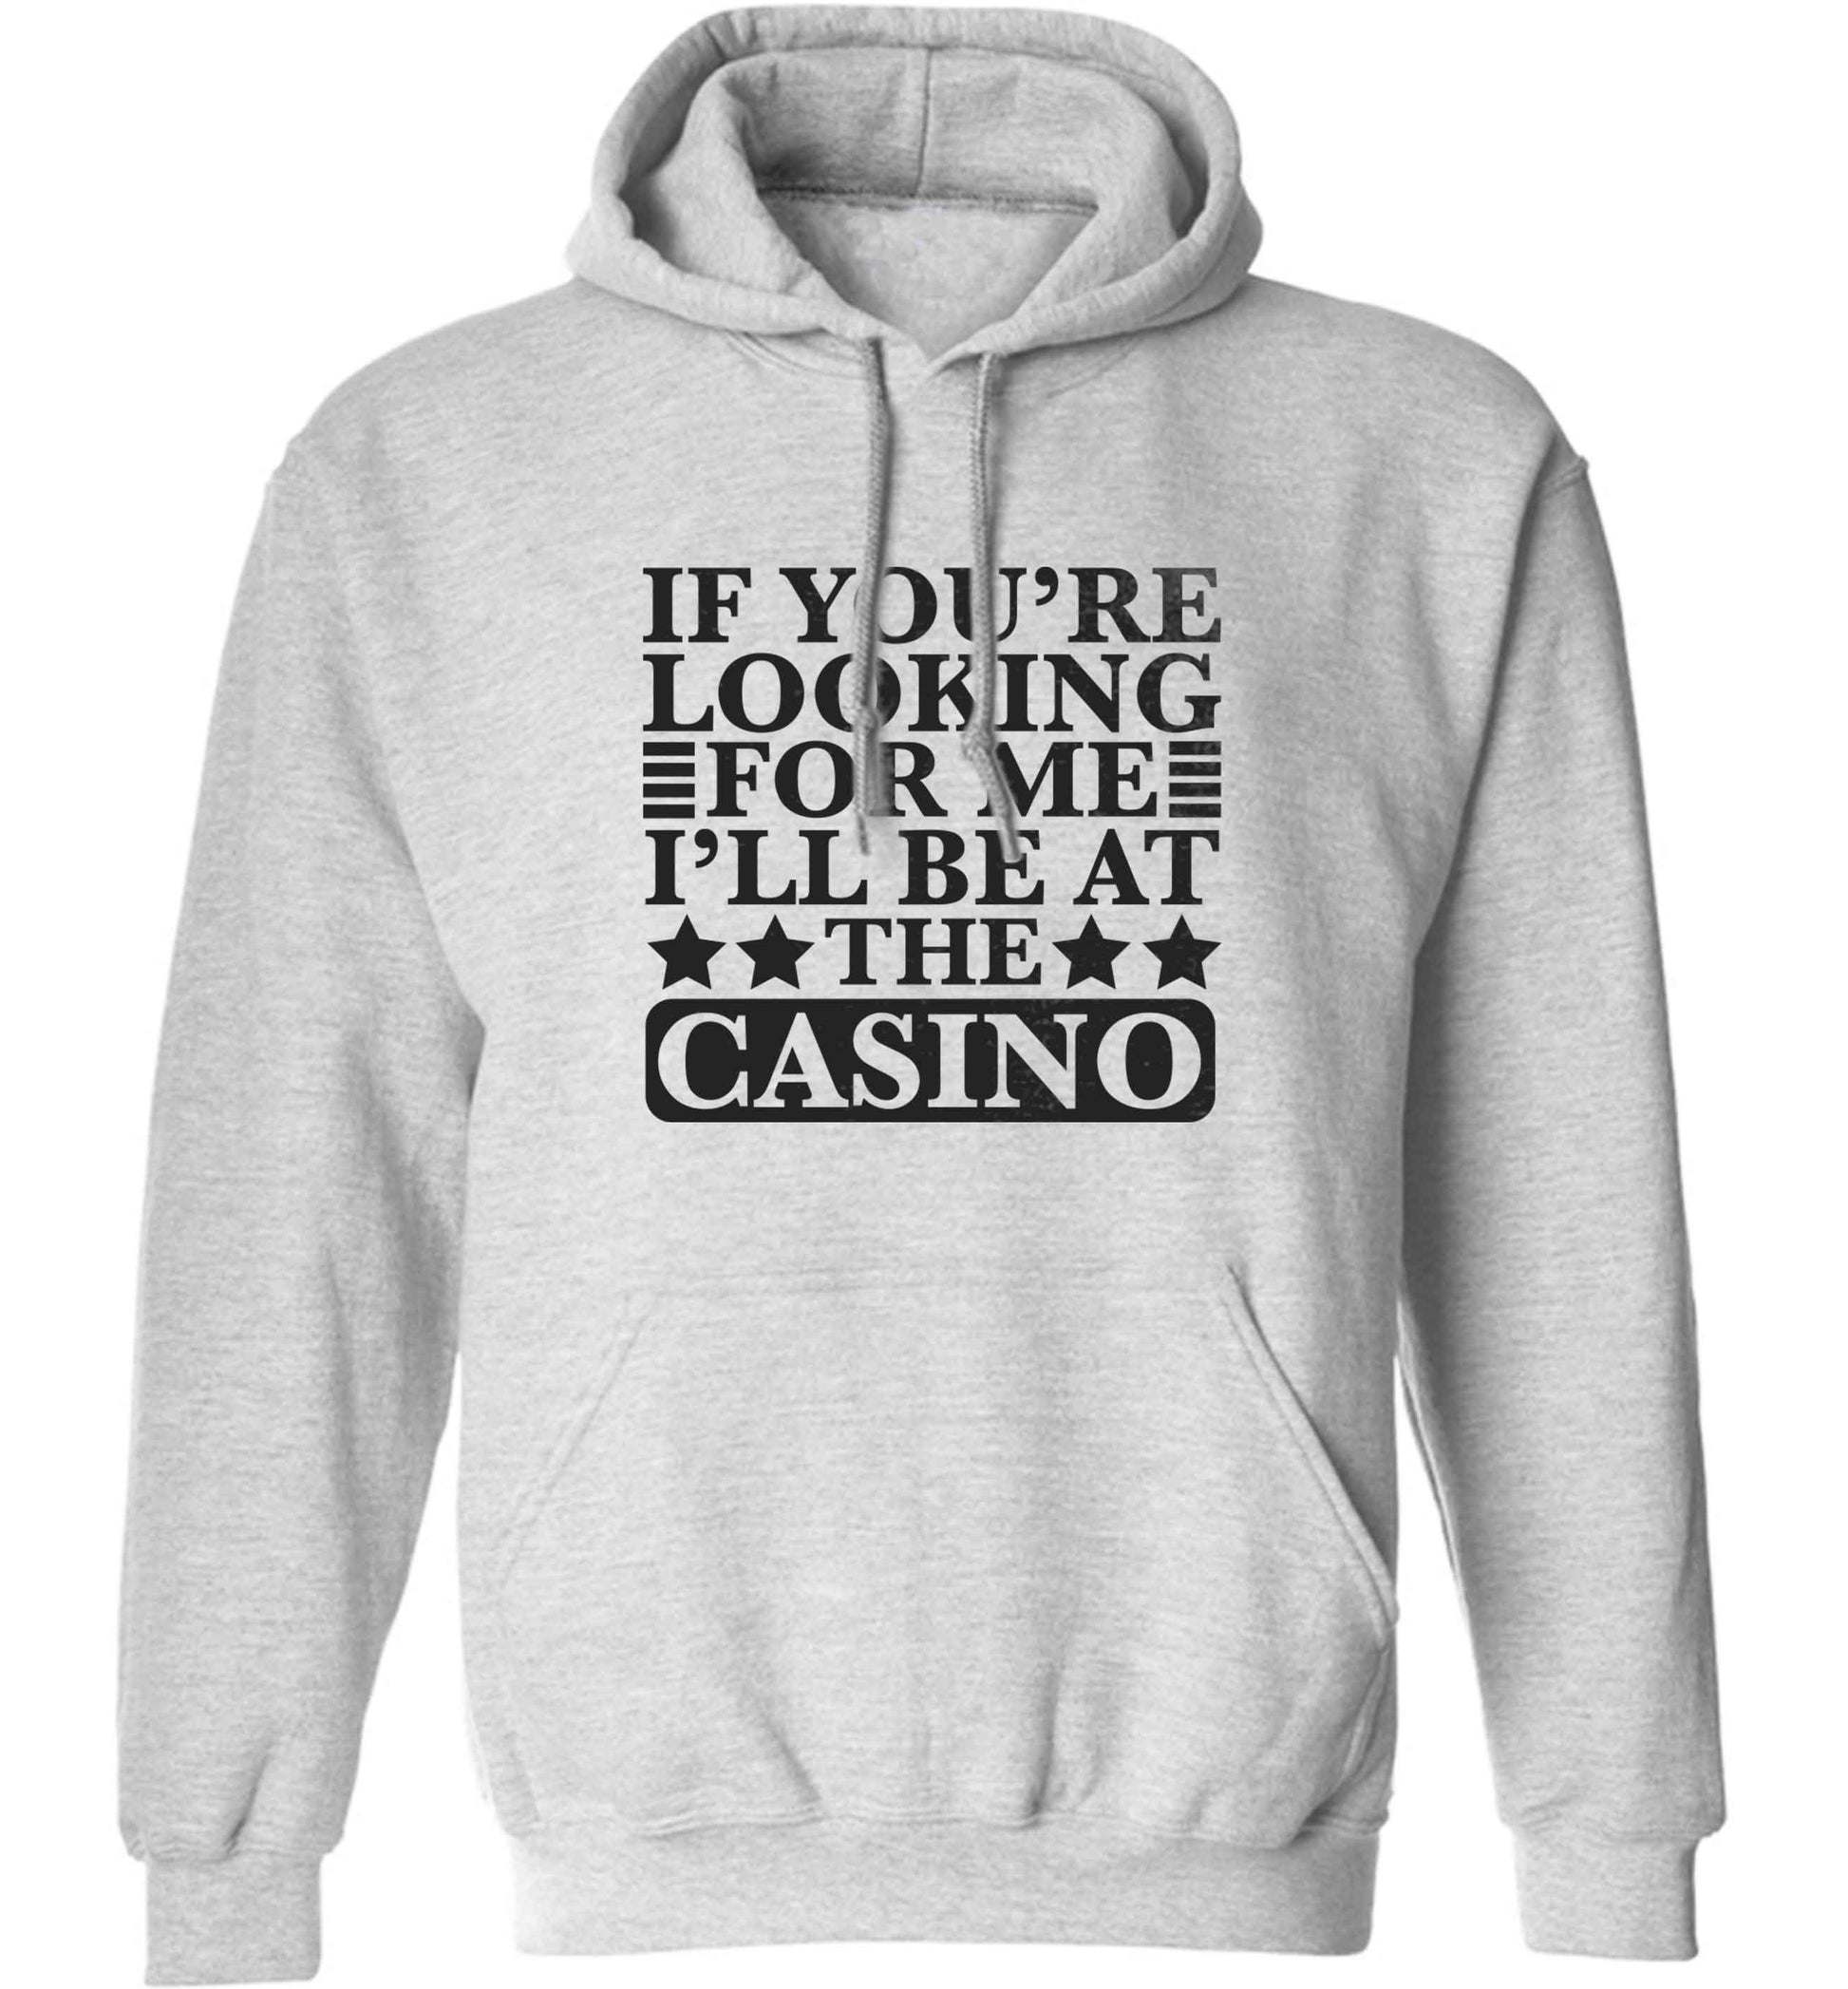 If you're looking for me I'll be at the casino adults unisex grey hoodie 2XL